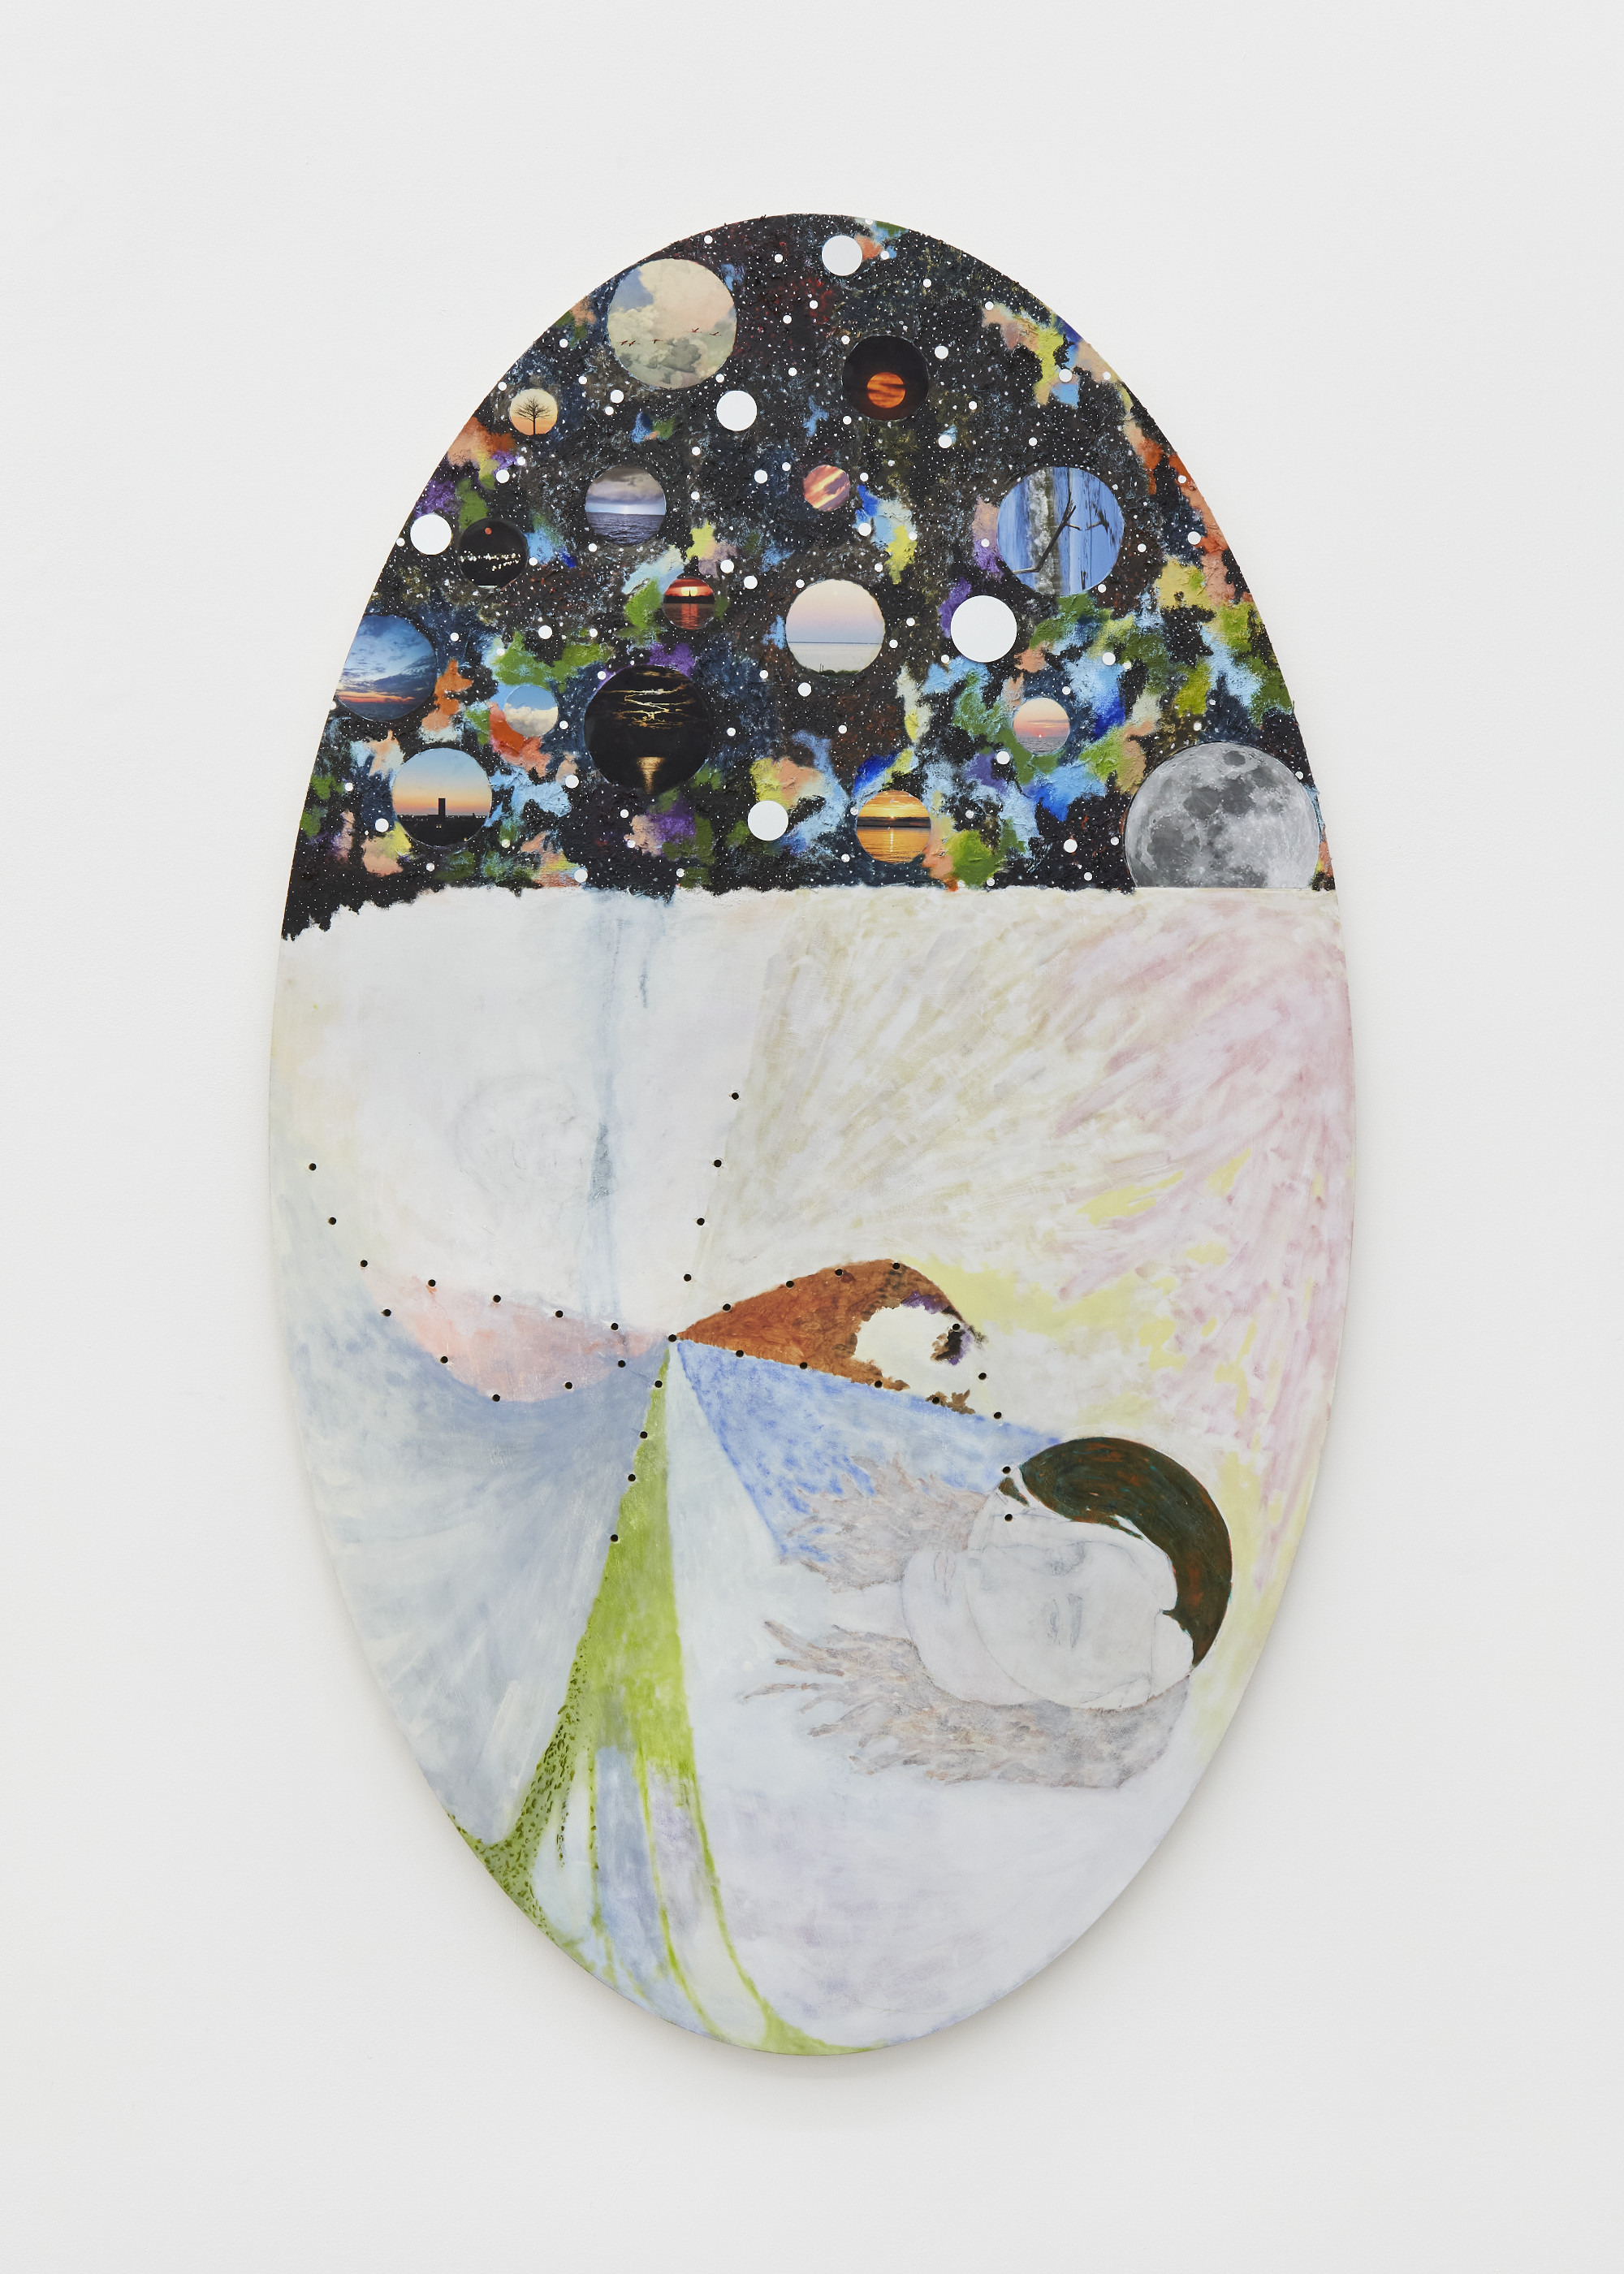   Projection (for N. Fyodorov), 2022. Oil, acrylic, jute fibres, collage, mirrors, aluminium foil tape and graphite, on panel, 81 x 137 cm / 31.8 x 53.9 in